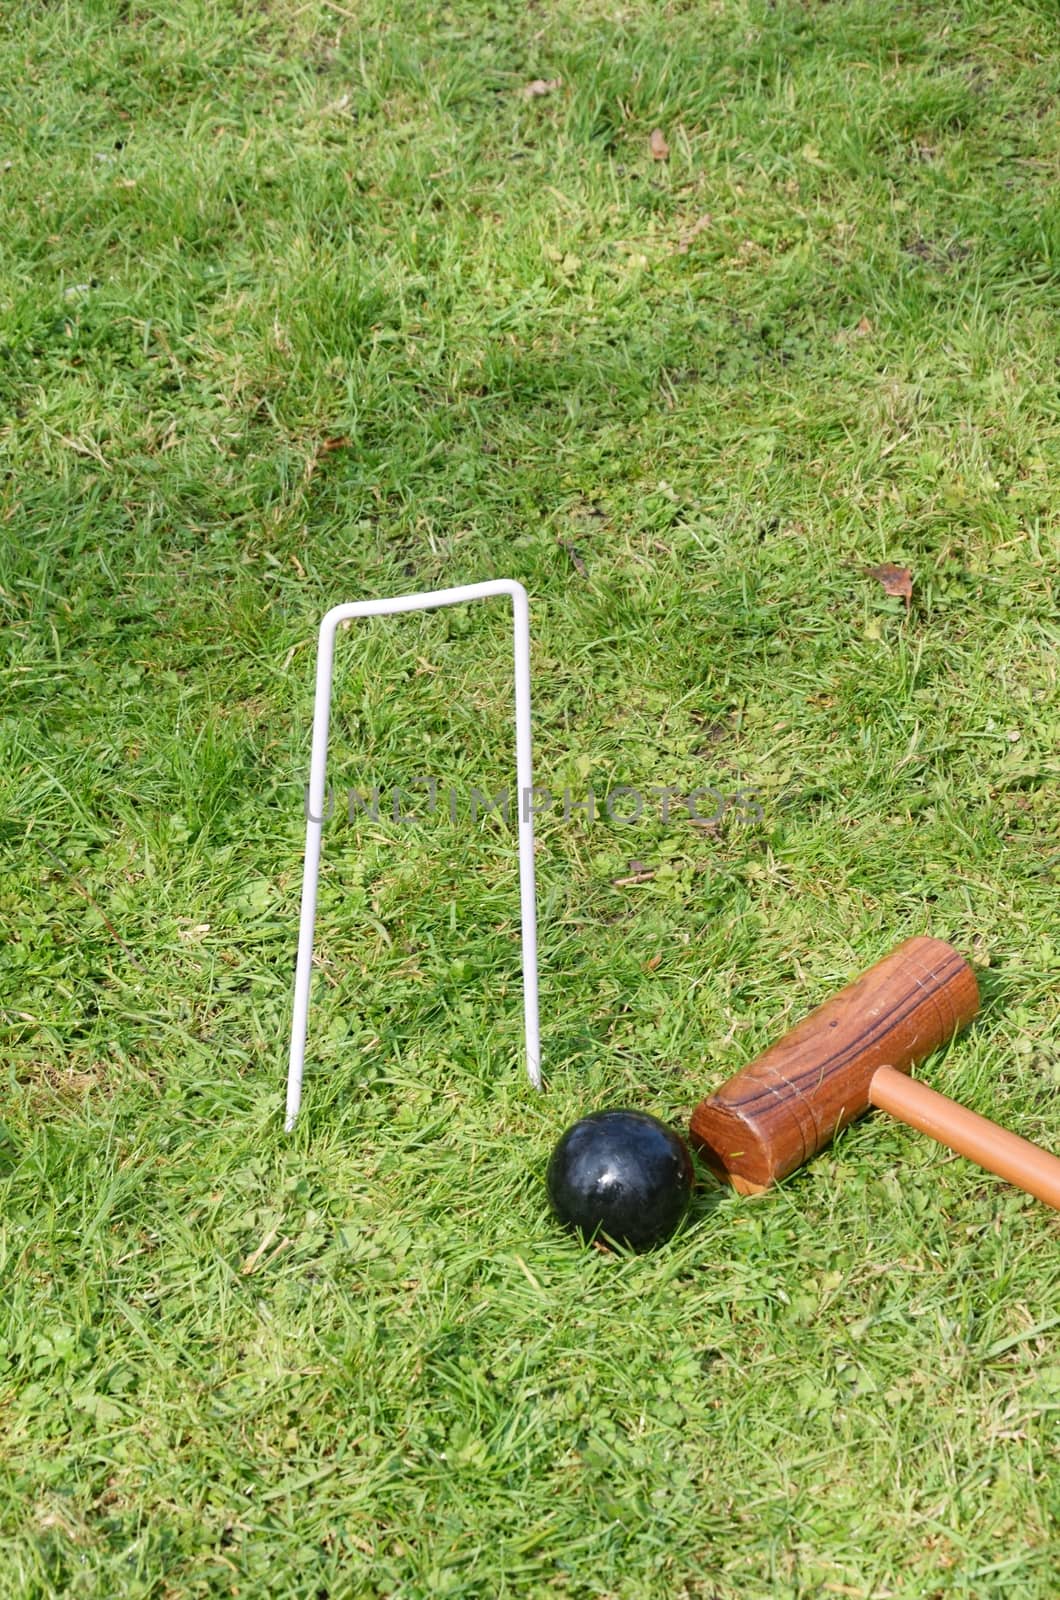 Croquet hoop mallet  with ball by pauws99